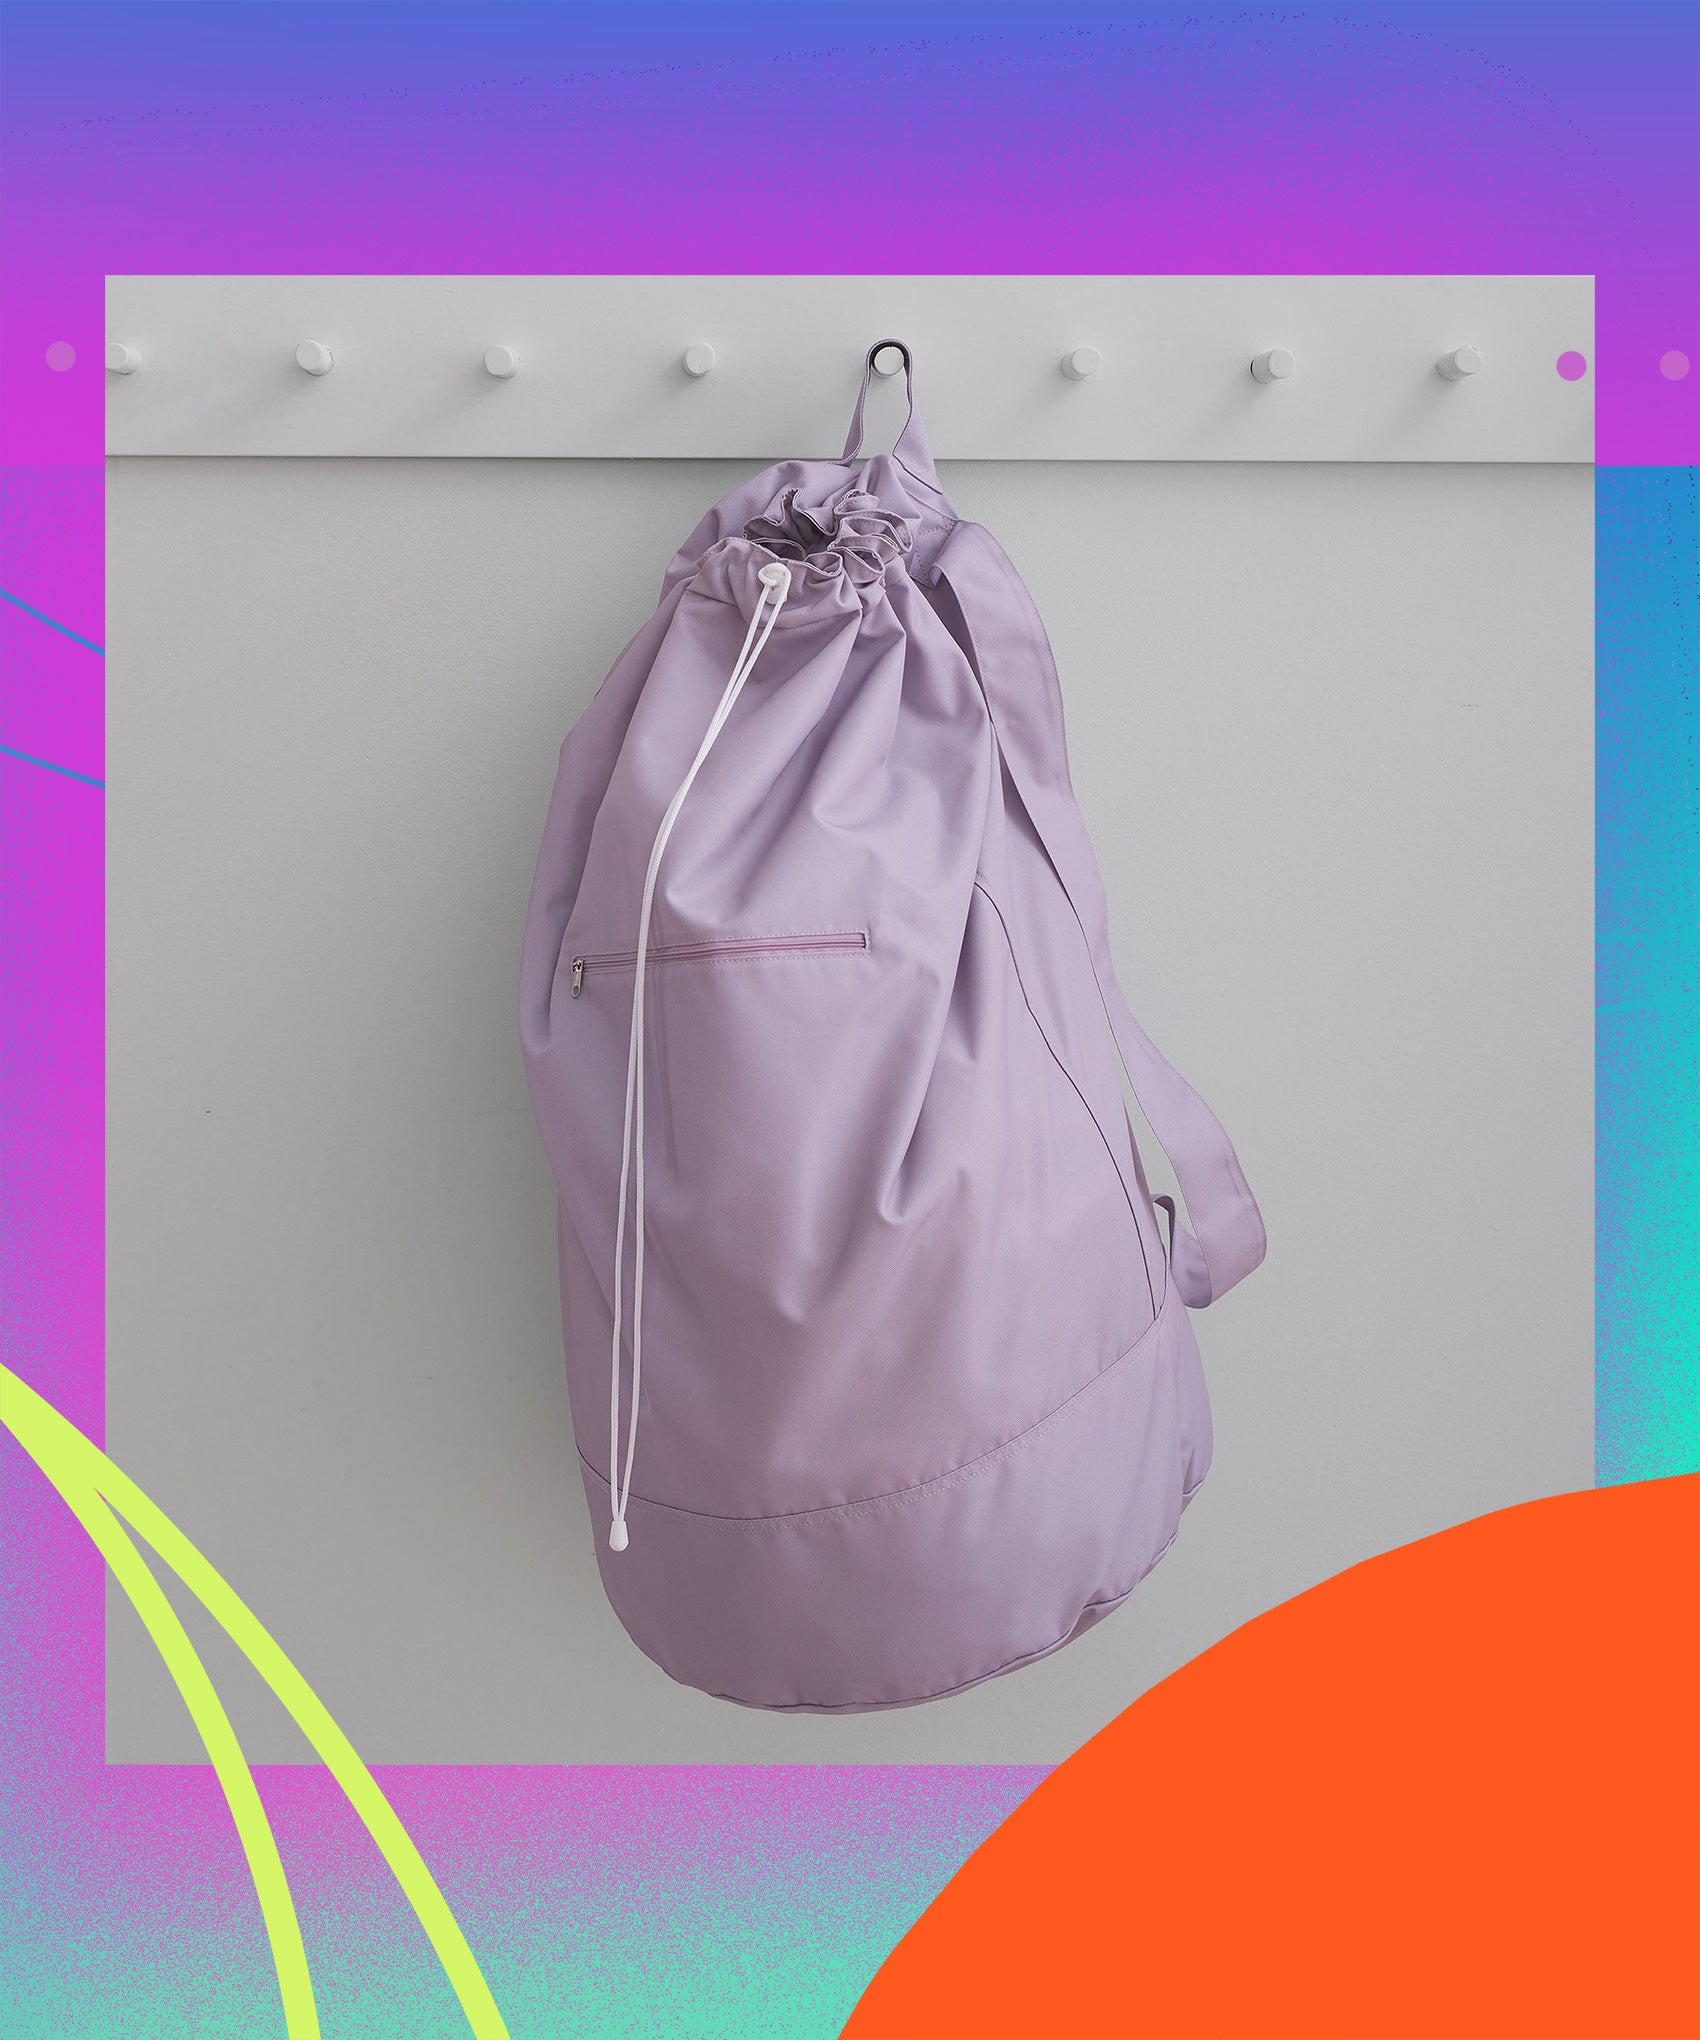 Linen Storage Bag. Washed Soft Linen Laundry Bag With Drawstring